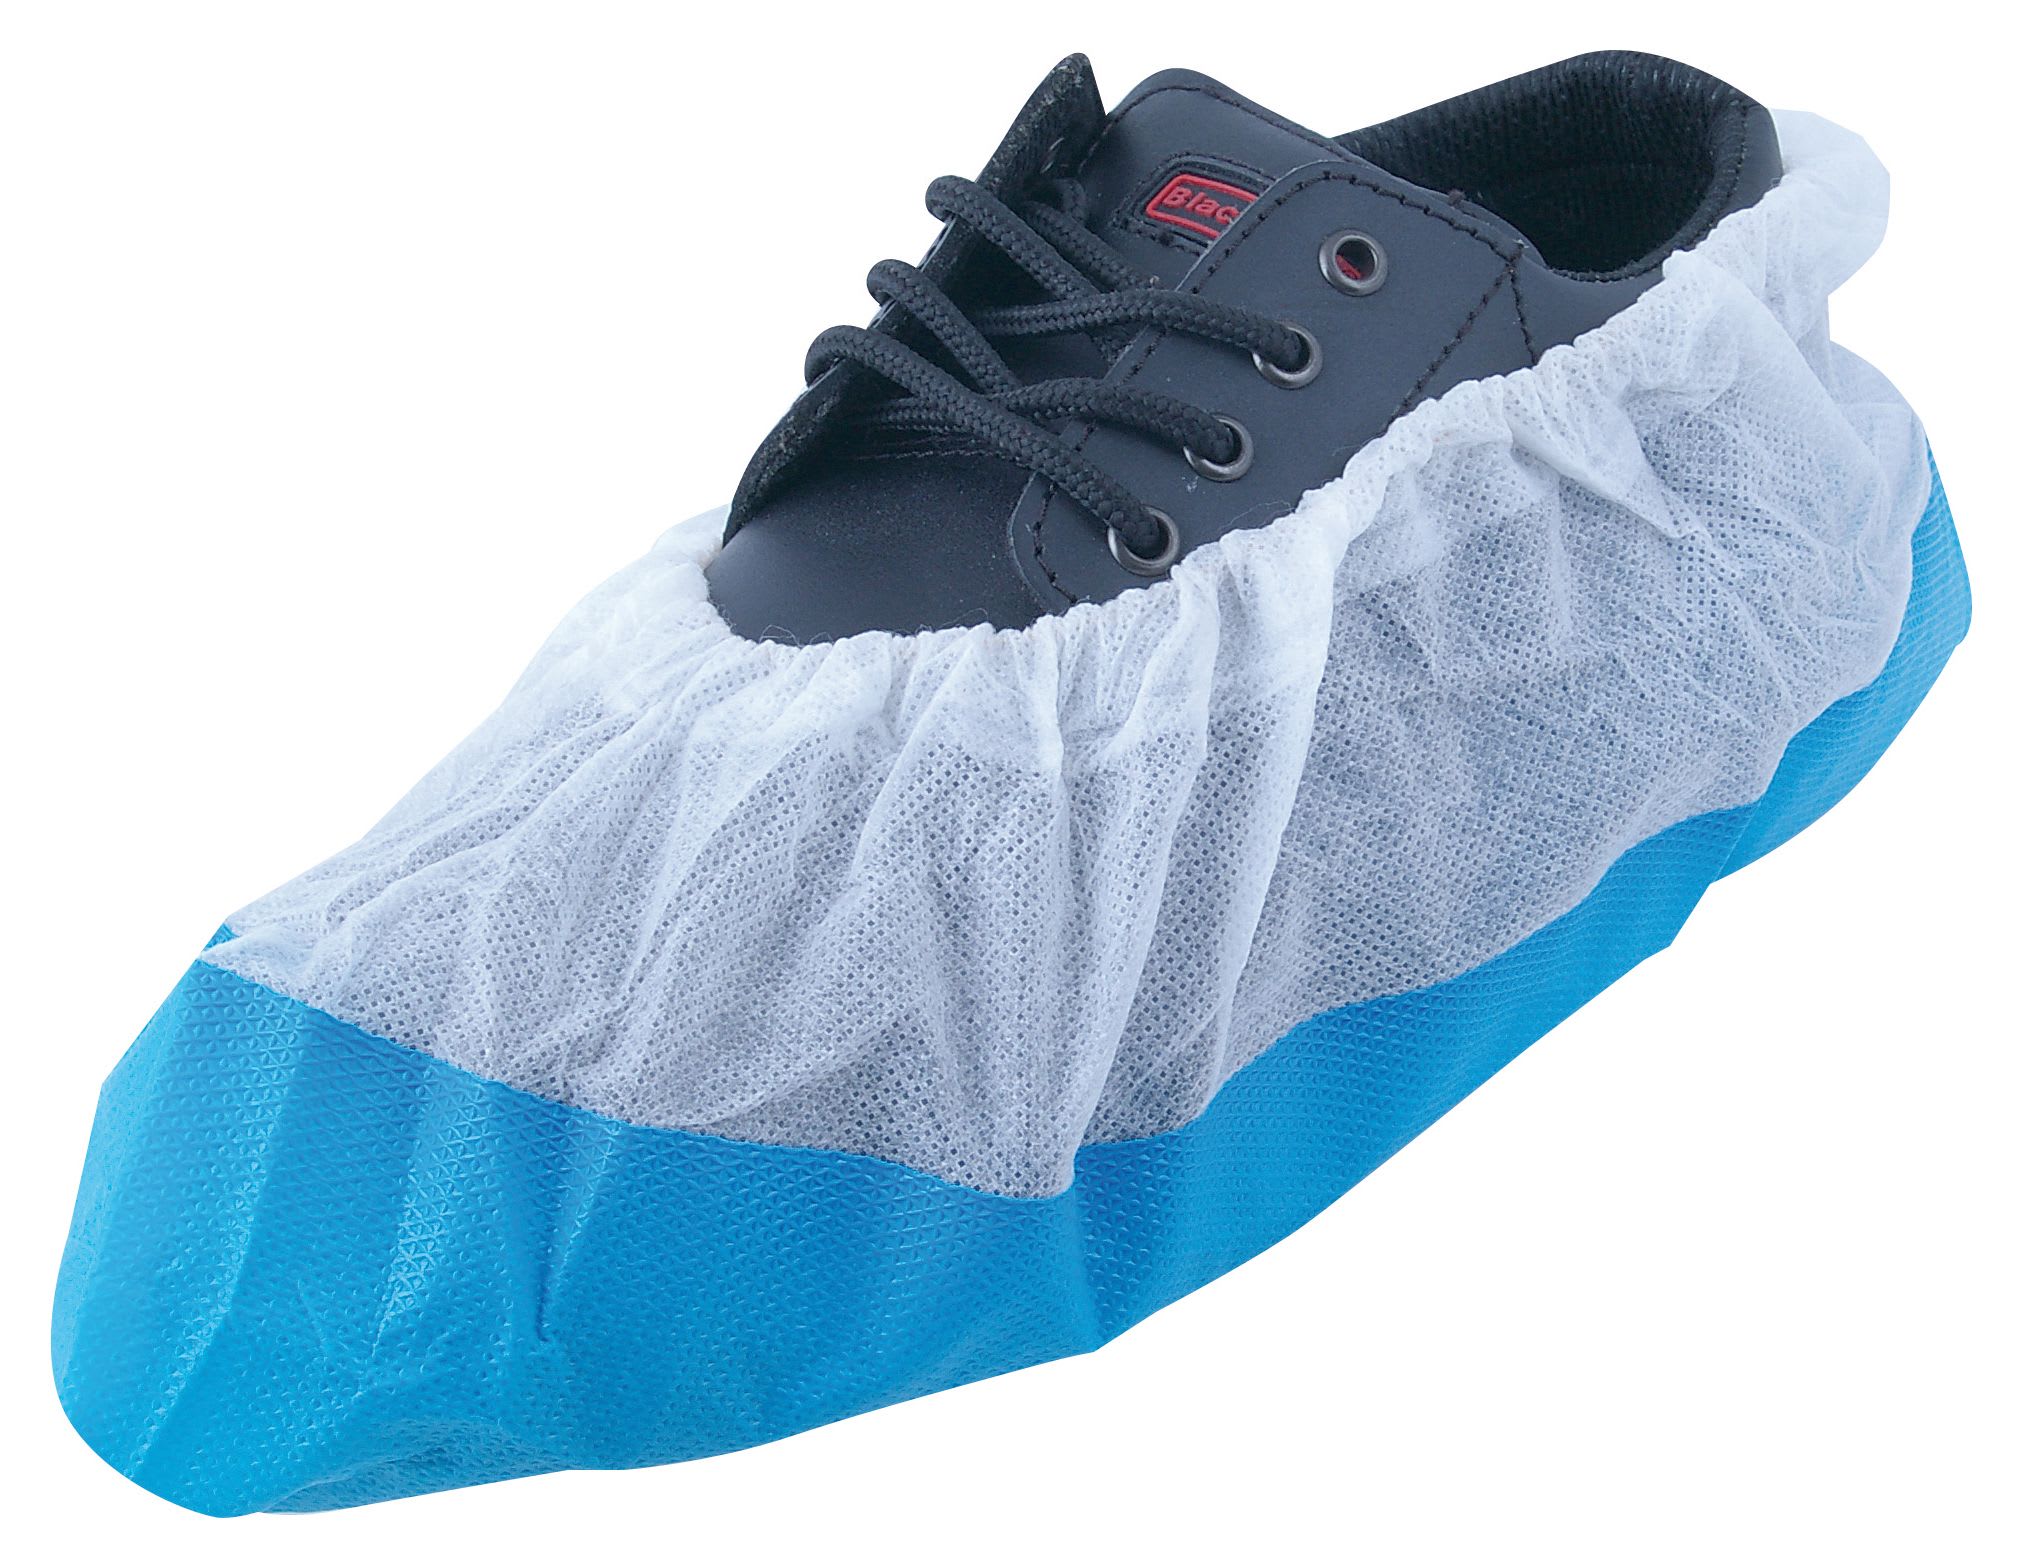 Blackrock Disposable Protective Blue Overshoe Covers - Pack